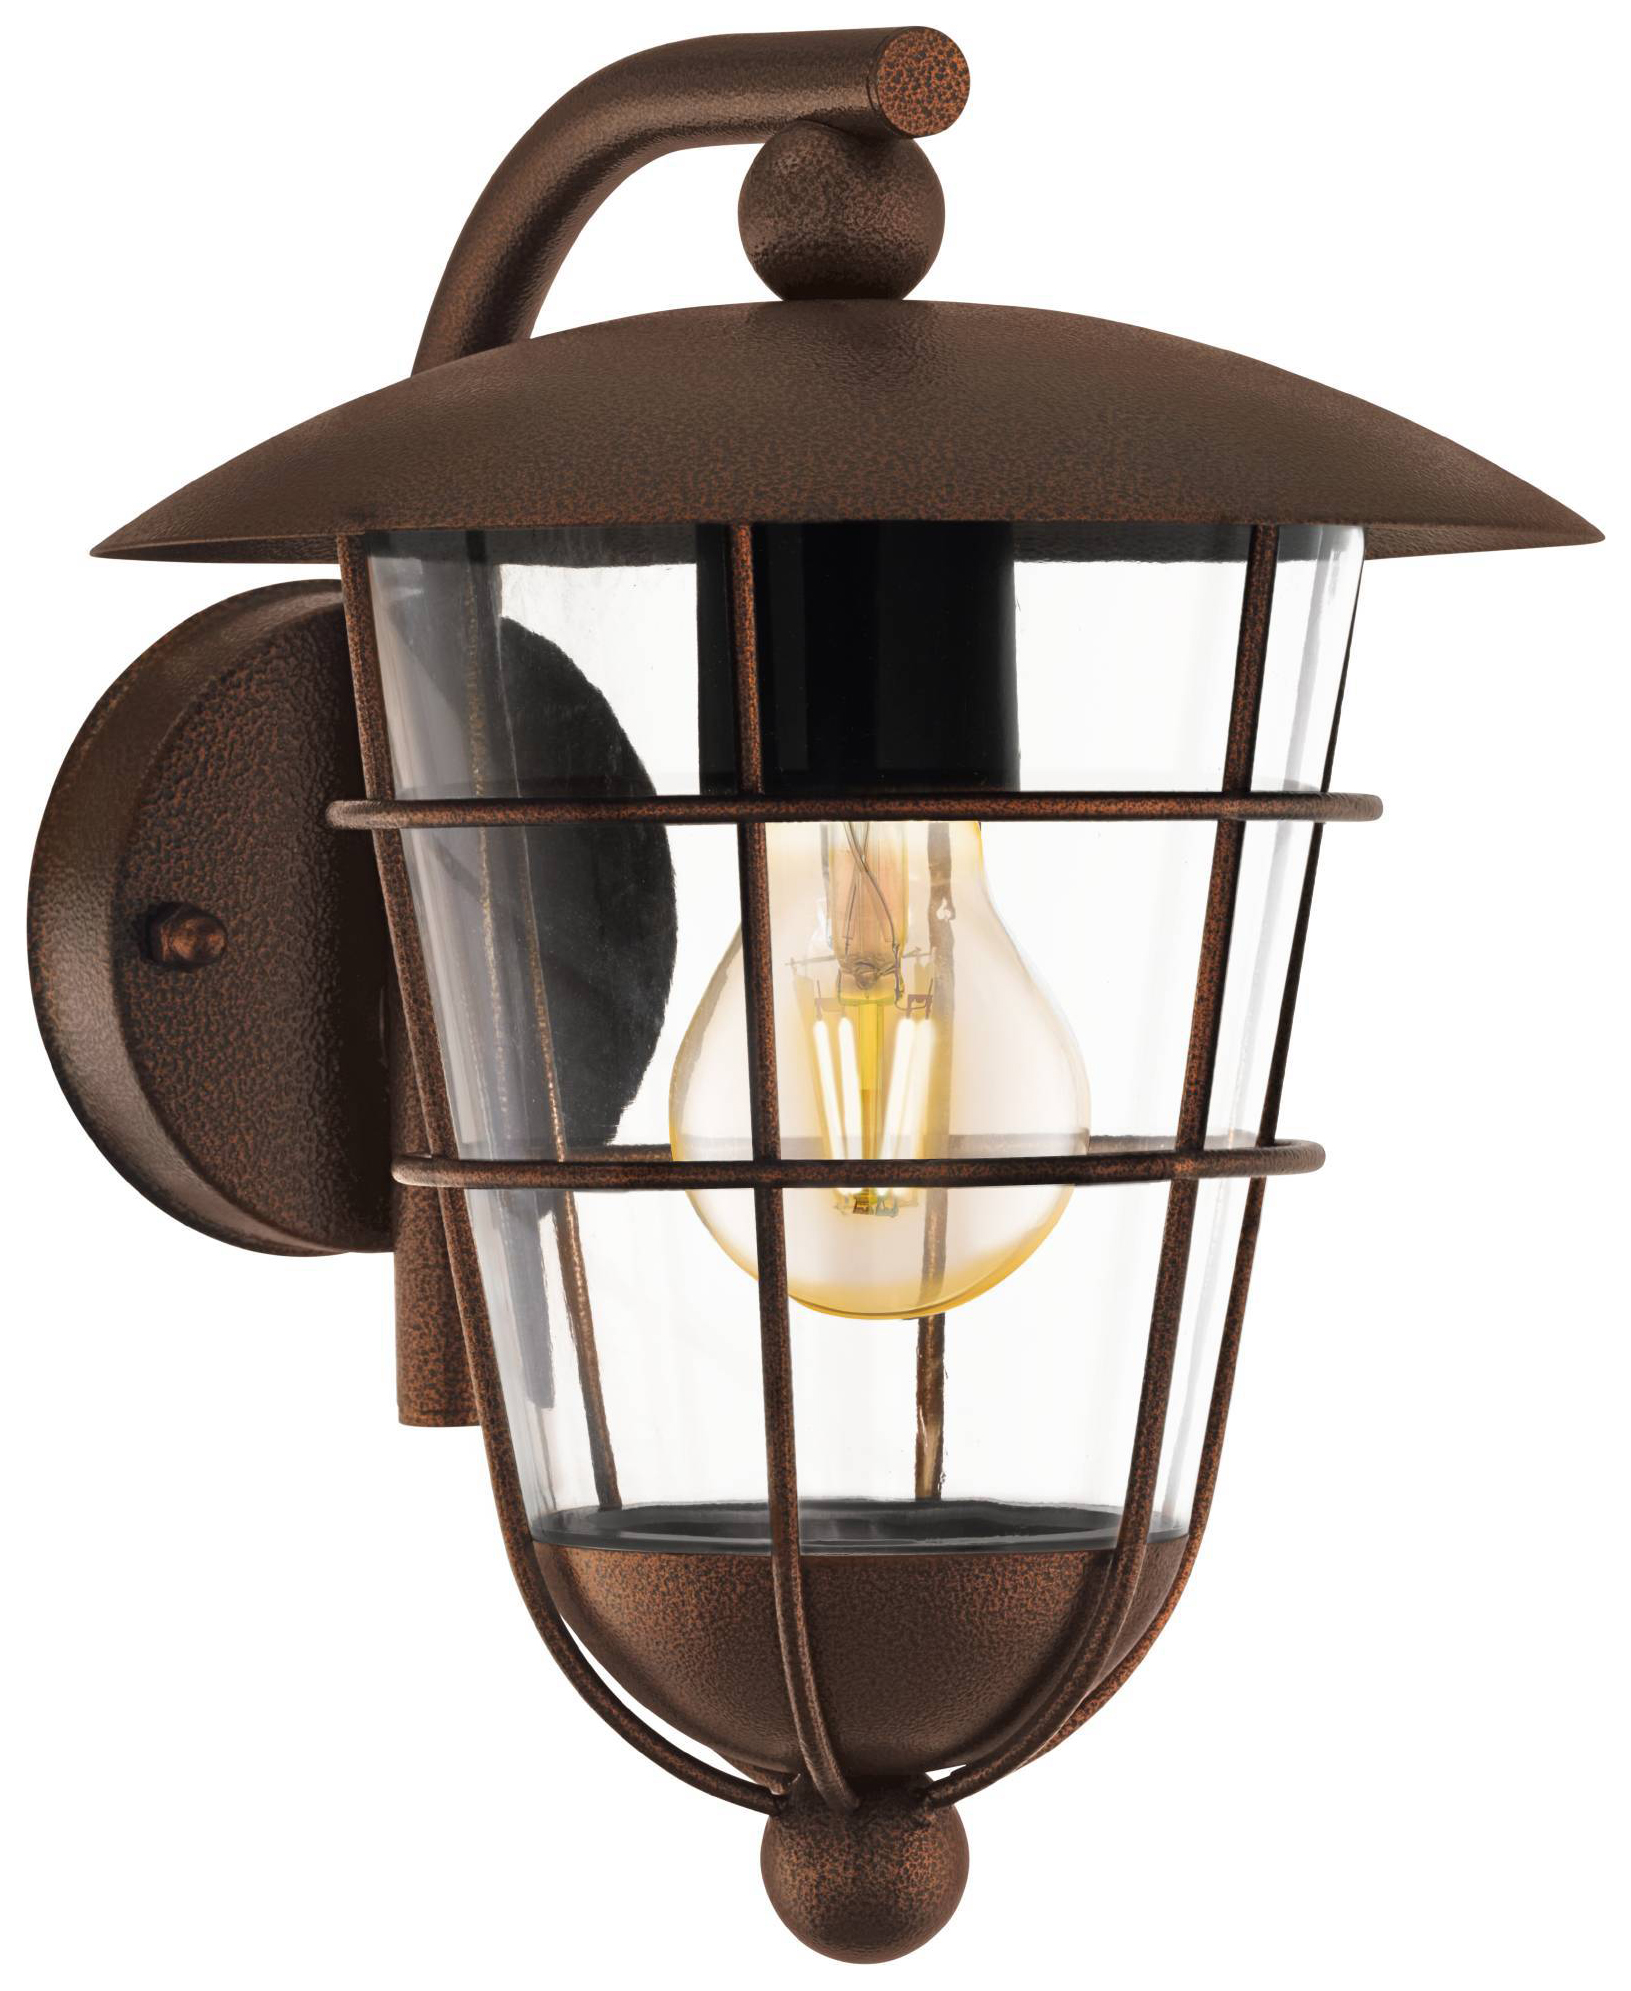 Image of Eglo Pulfero Outdoor Brown Downwards Wall Light